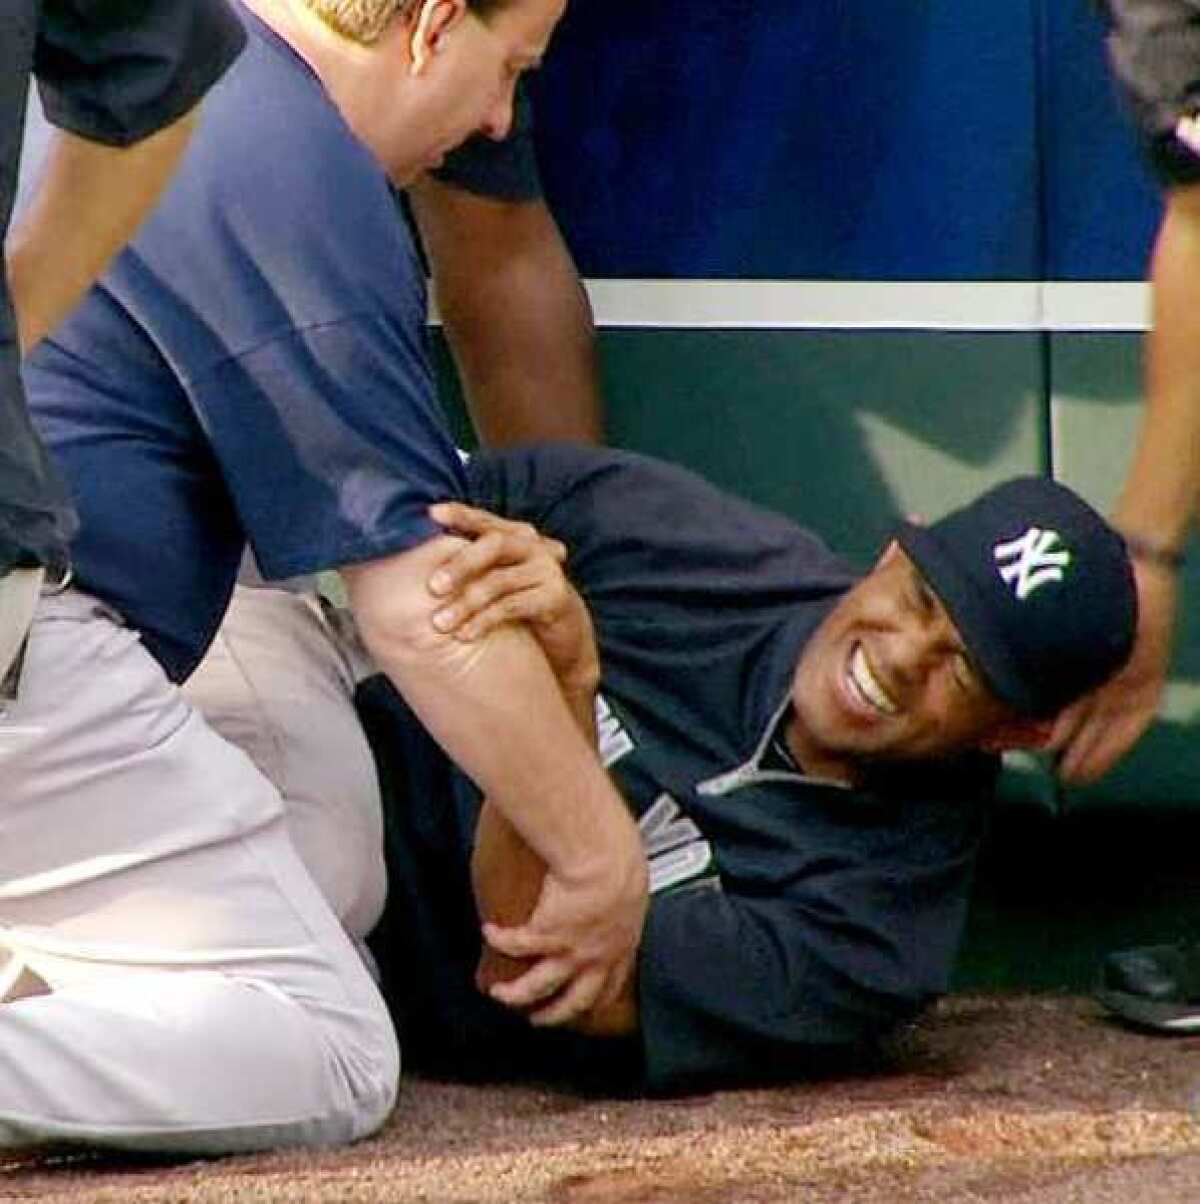 New York Yankees' Mariano Rivera grimaces after twisting his right knee shagging fly balls during batting practice on Thursday evening.